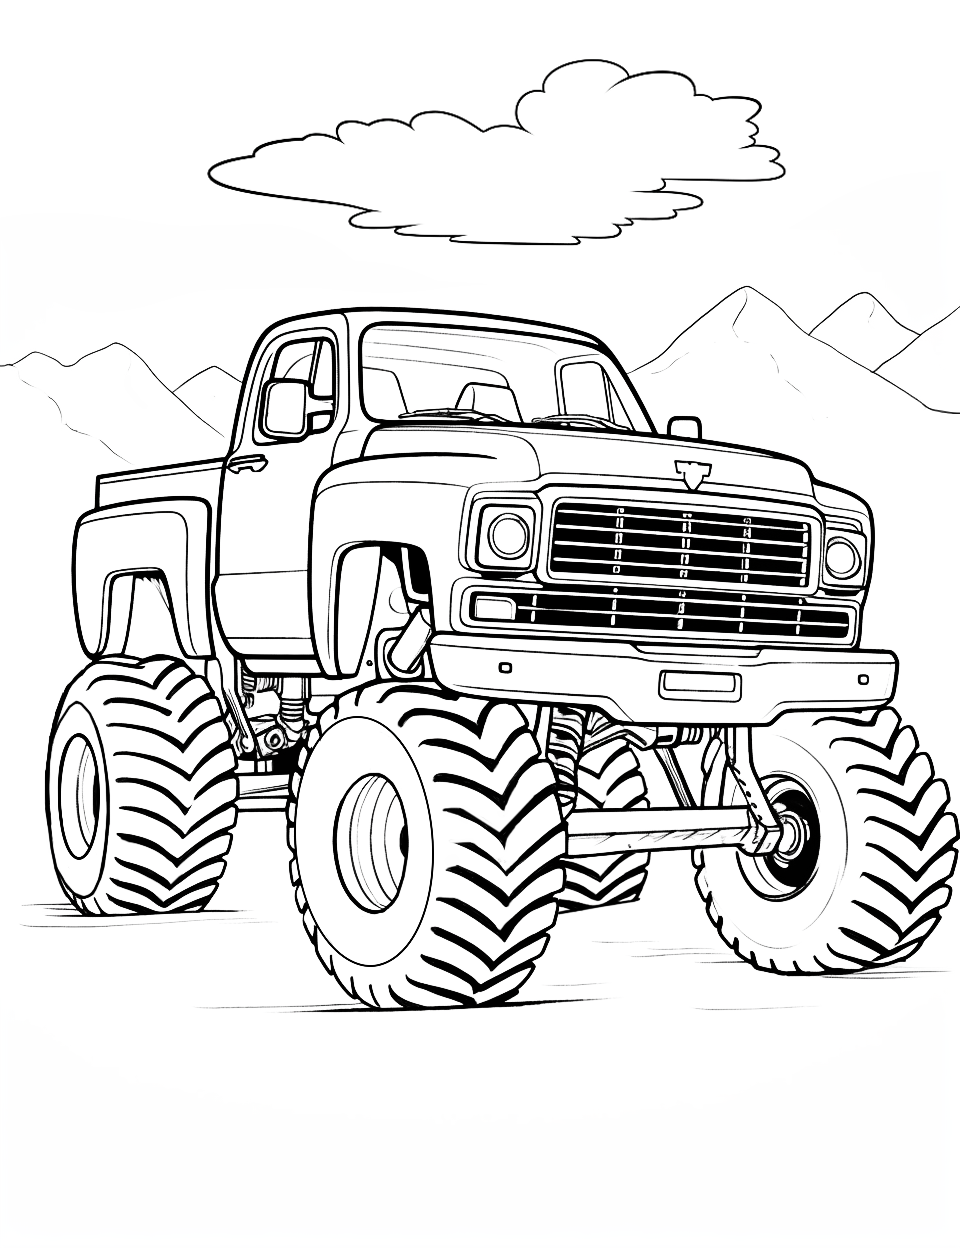 Pickup Truck Rally Monster Coloring Page - A classic pickup transformed into a monster truck, ready for action.